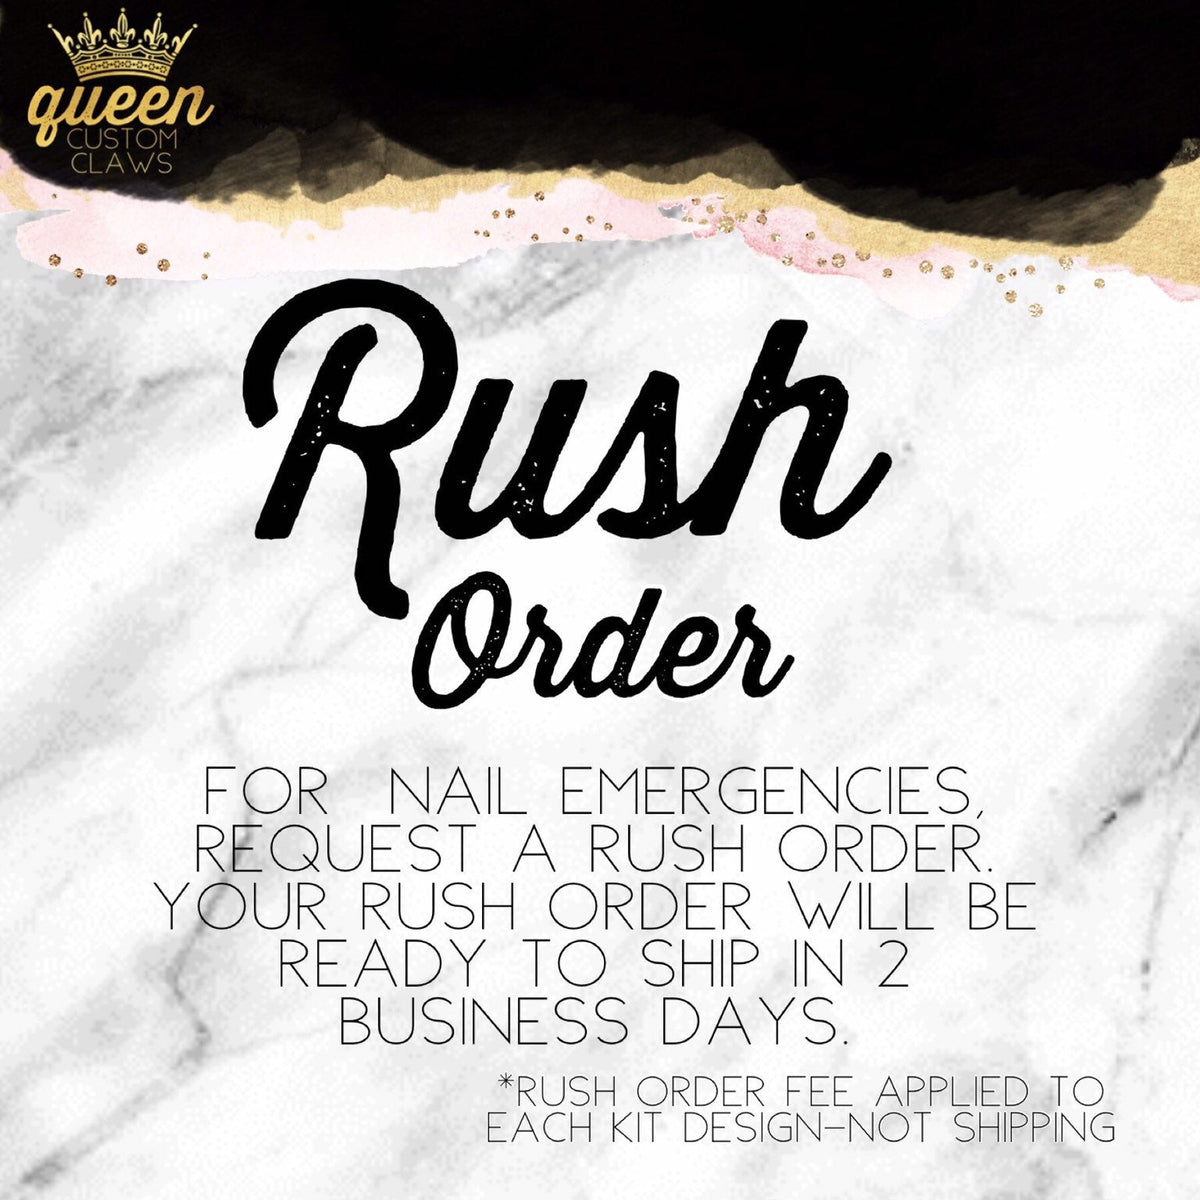 Rush Delivery Rush My Order Rush my Delivery Rush Order,RUSH ORDER FEE !!